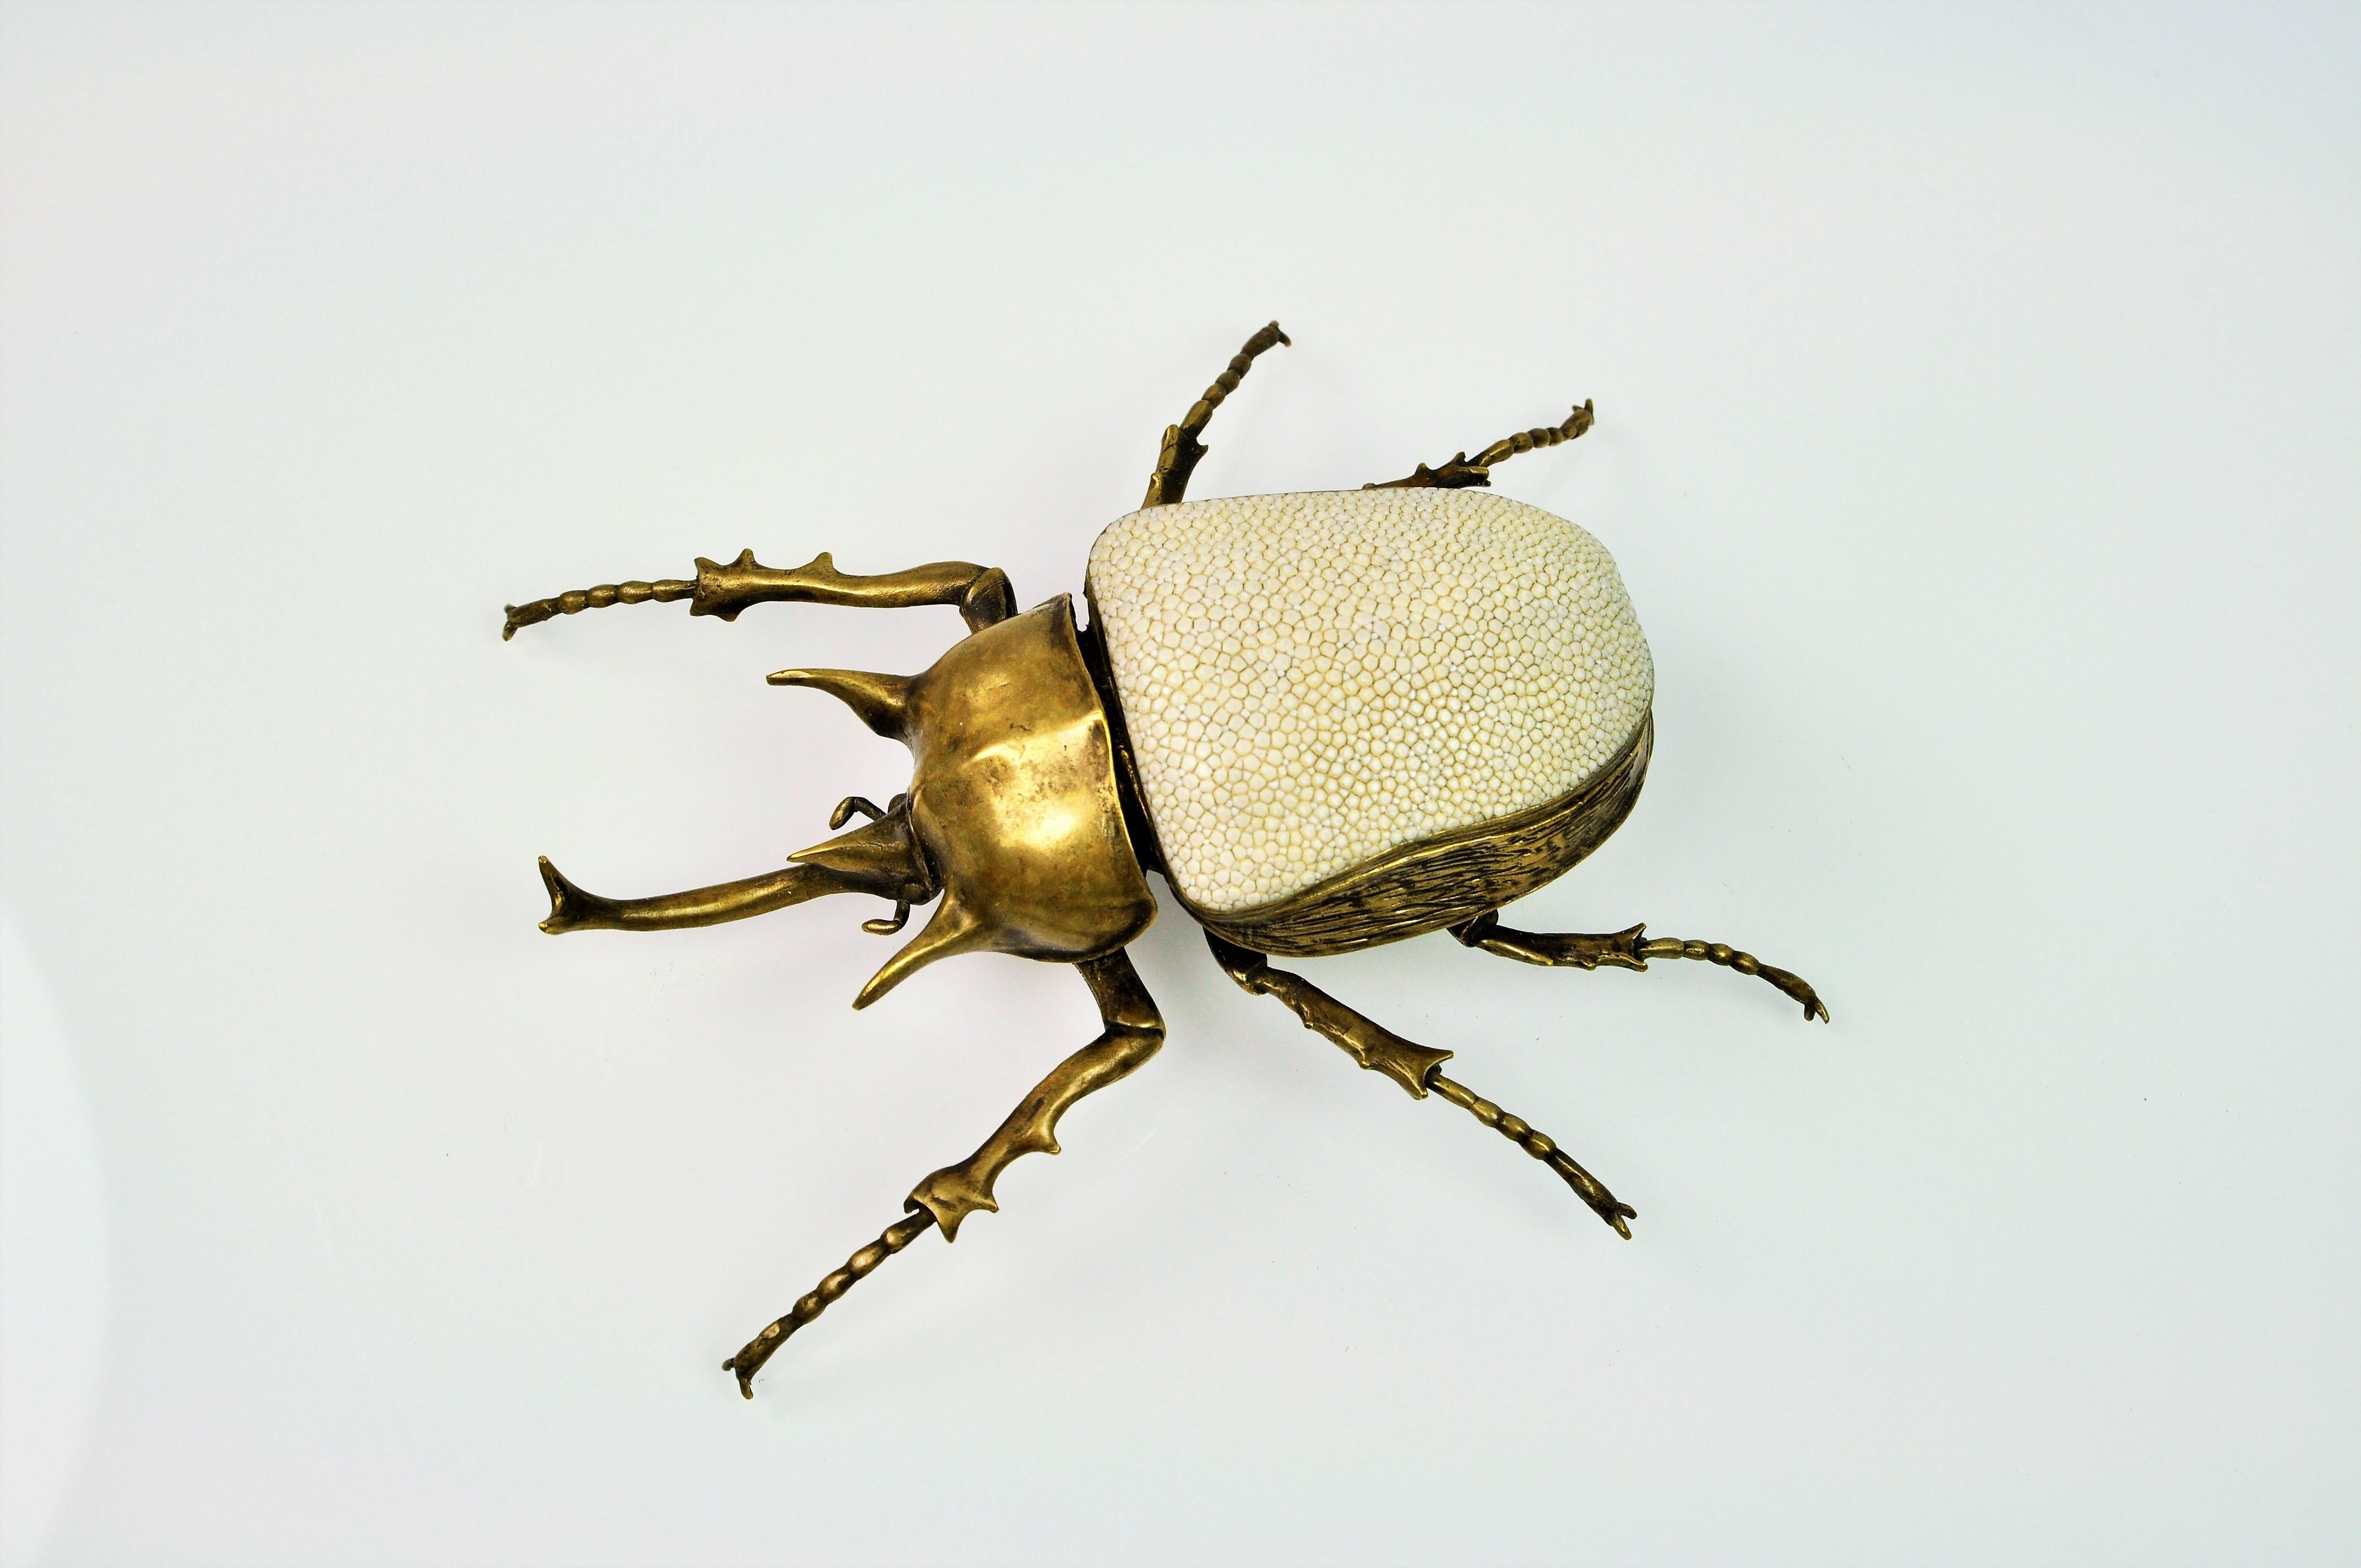 The Goliath Scarab box is a best seller at Ginger Brown
This piece is made in lost wax cast brass with a bronze patina. The brass lid is covered with shagreen.

That box has been realized from a real scarab. The famous Megasoma actaeon from the